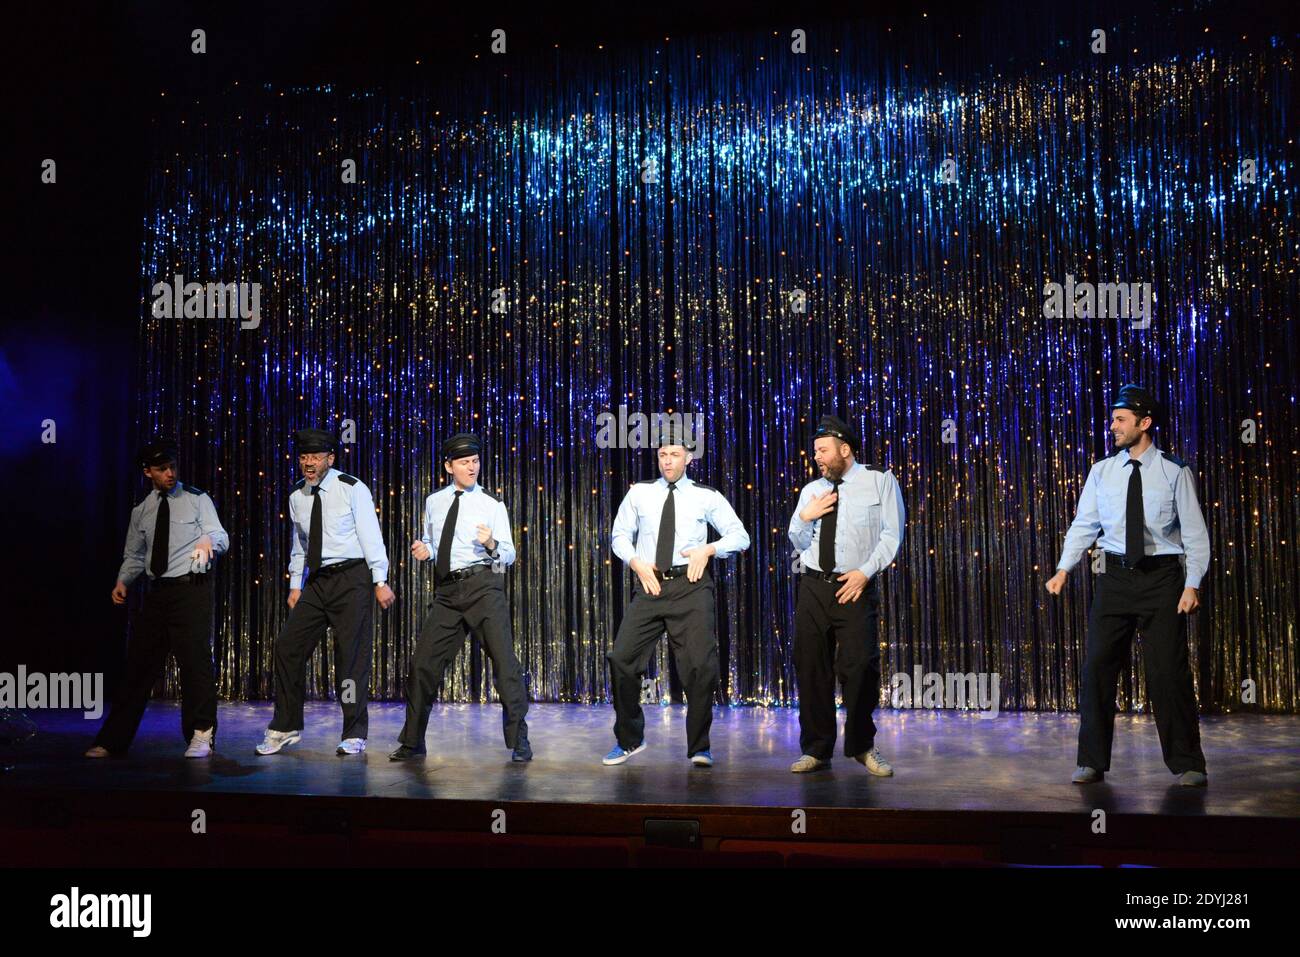 The Showcase of musical comedy 'The Full Monty' held at Theatre Comedia in Paris, France, on April 3, 2013. Photo by Nicolas Briquet/ABACAPRESS.COM Stock Photo